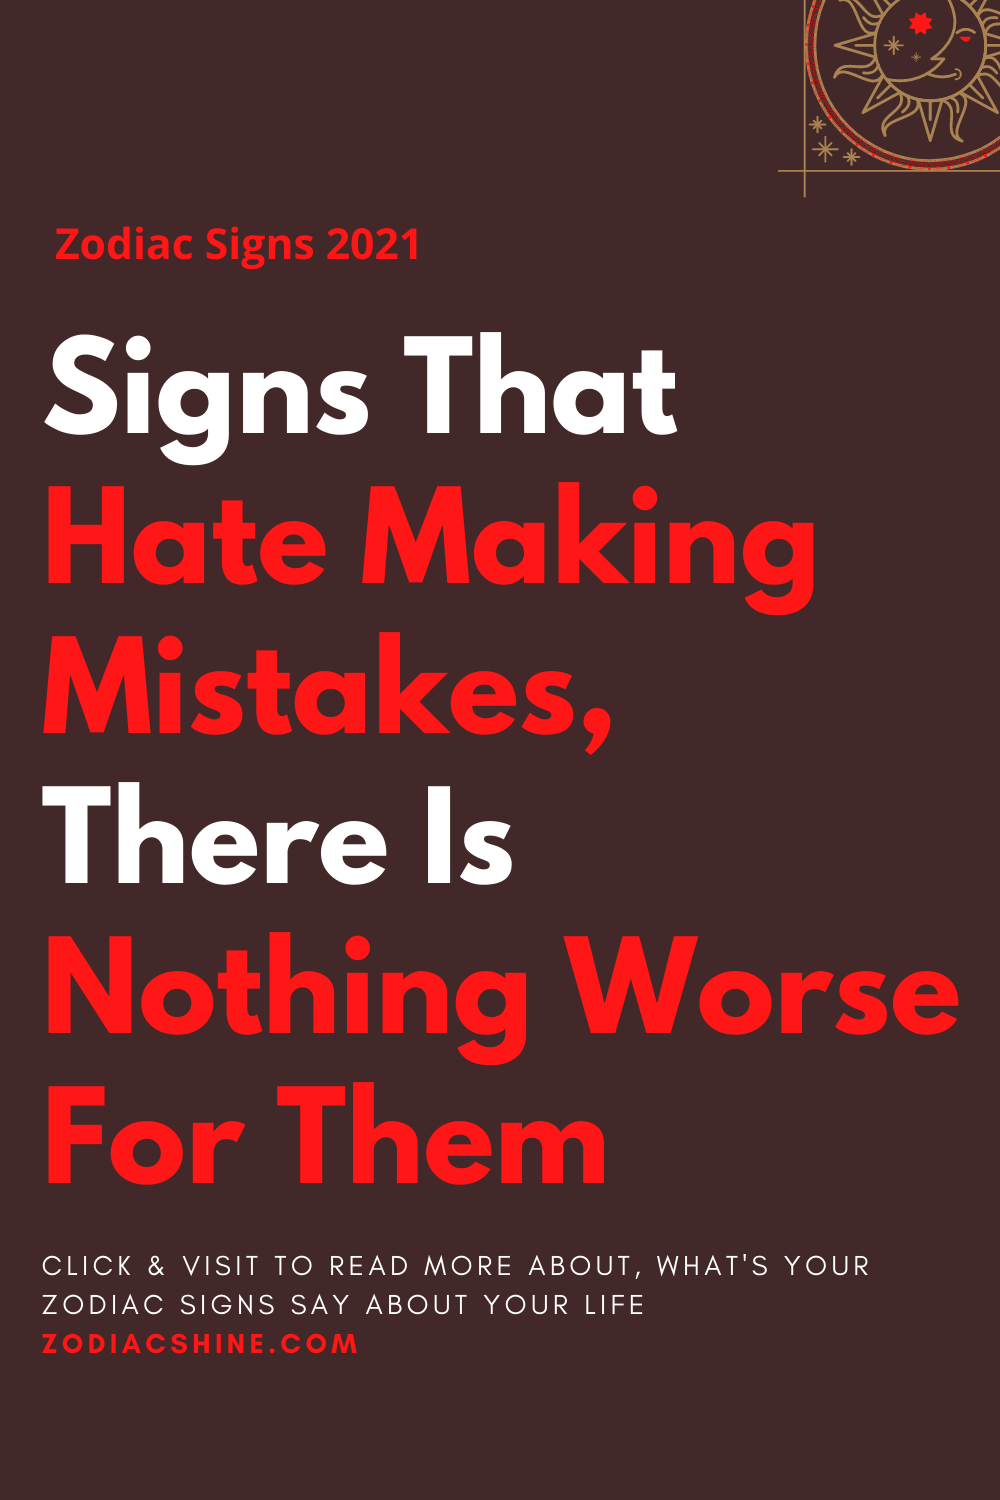 Signs That Hate Making Mistakes, There Is Nothing Worse For Them